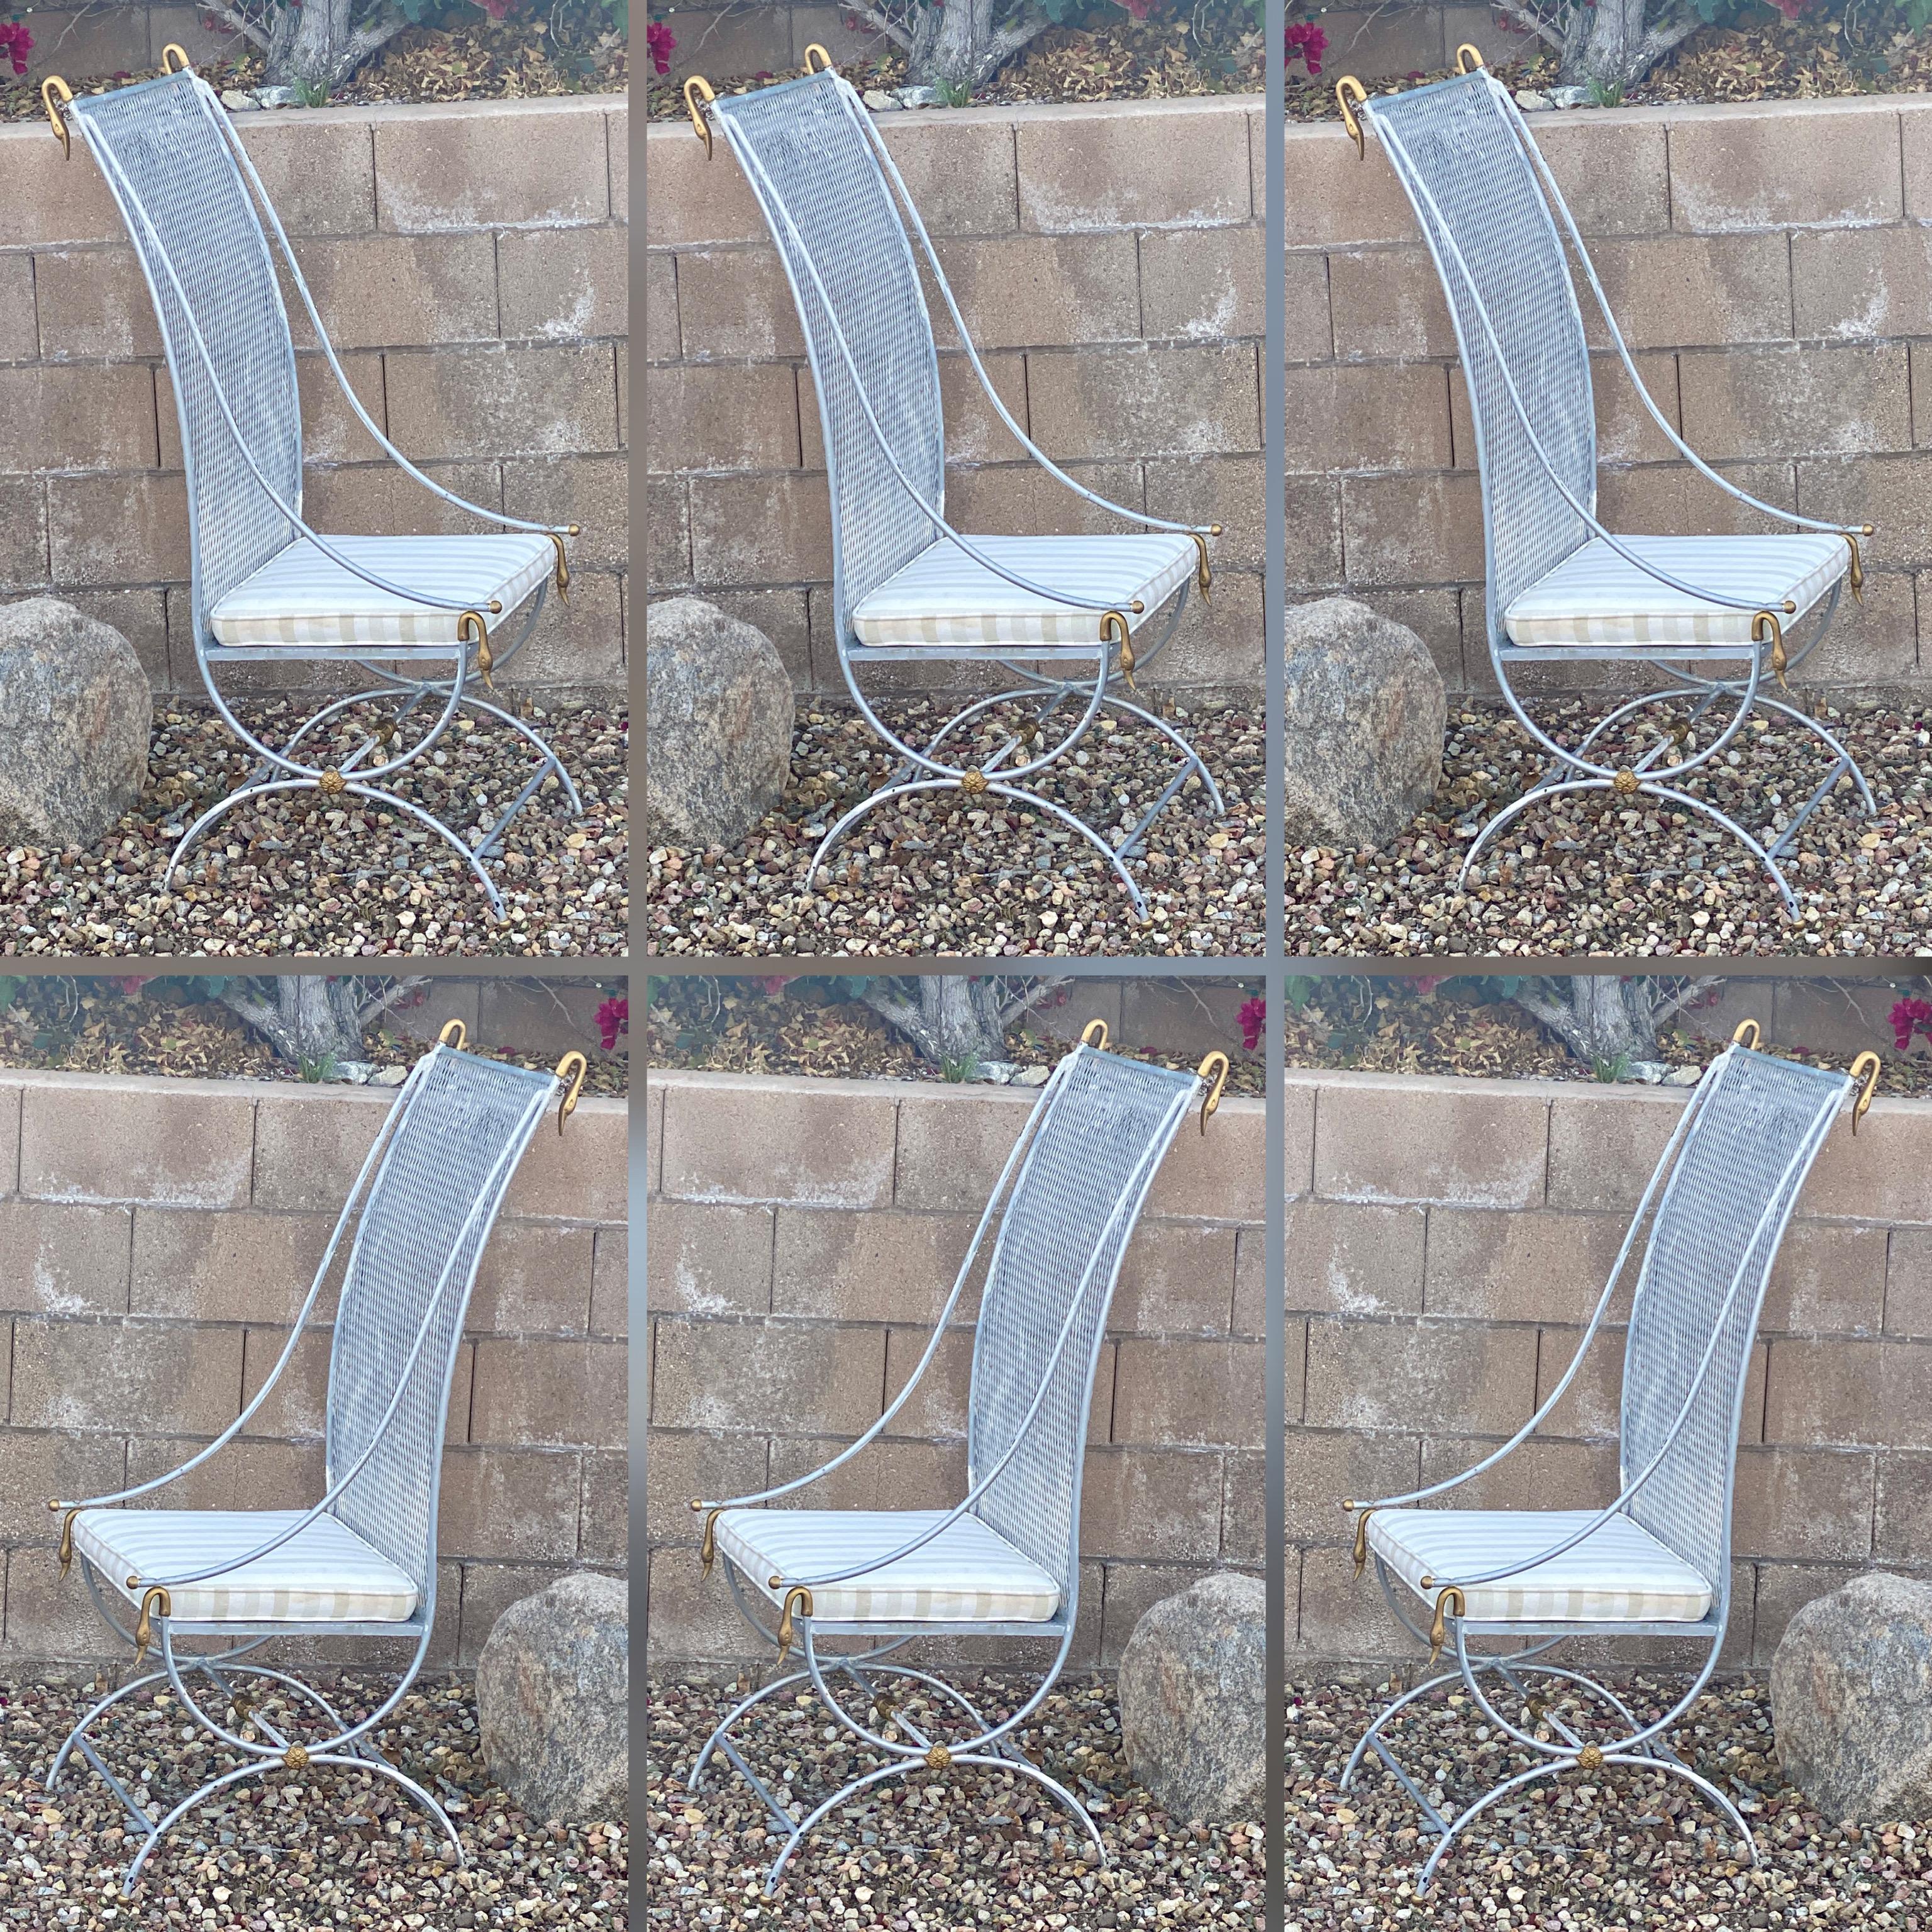 Proud to present a rare set of French patio chairs in the style of Maison Jansen. Not documented, the same solid brass swan heads were used in another set of patio chairs designed by Maison Jansen. This set of chairs came from an artist’s desert